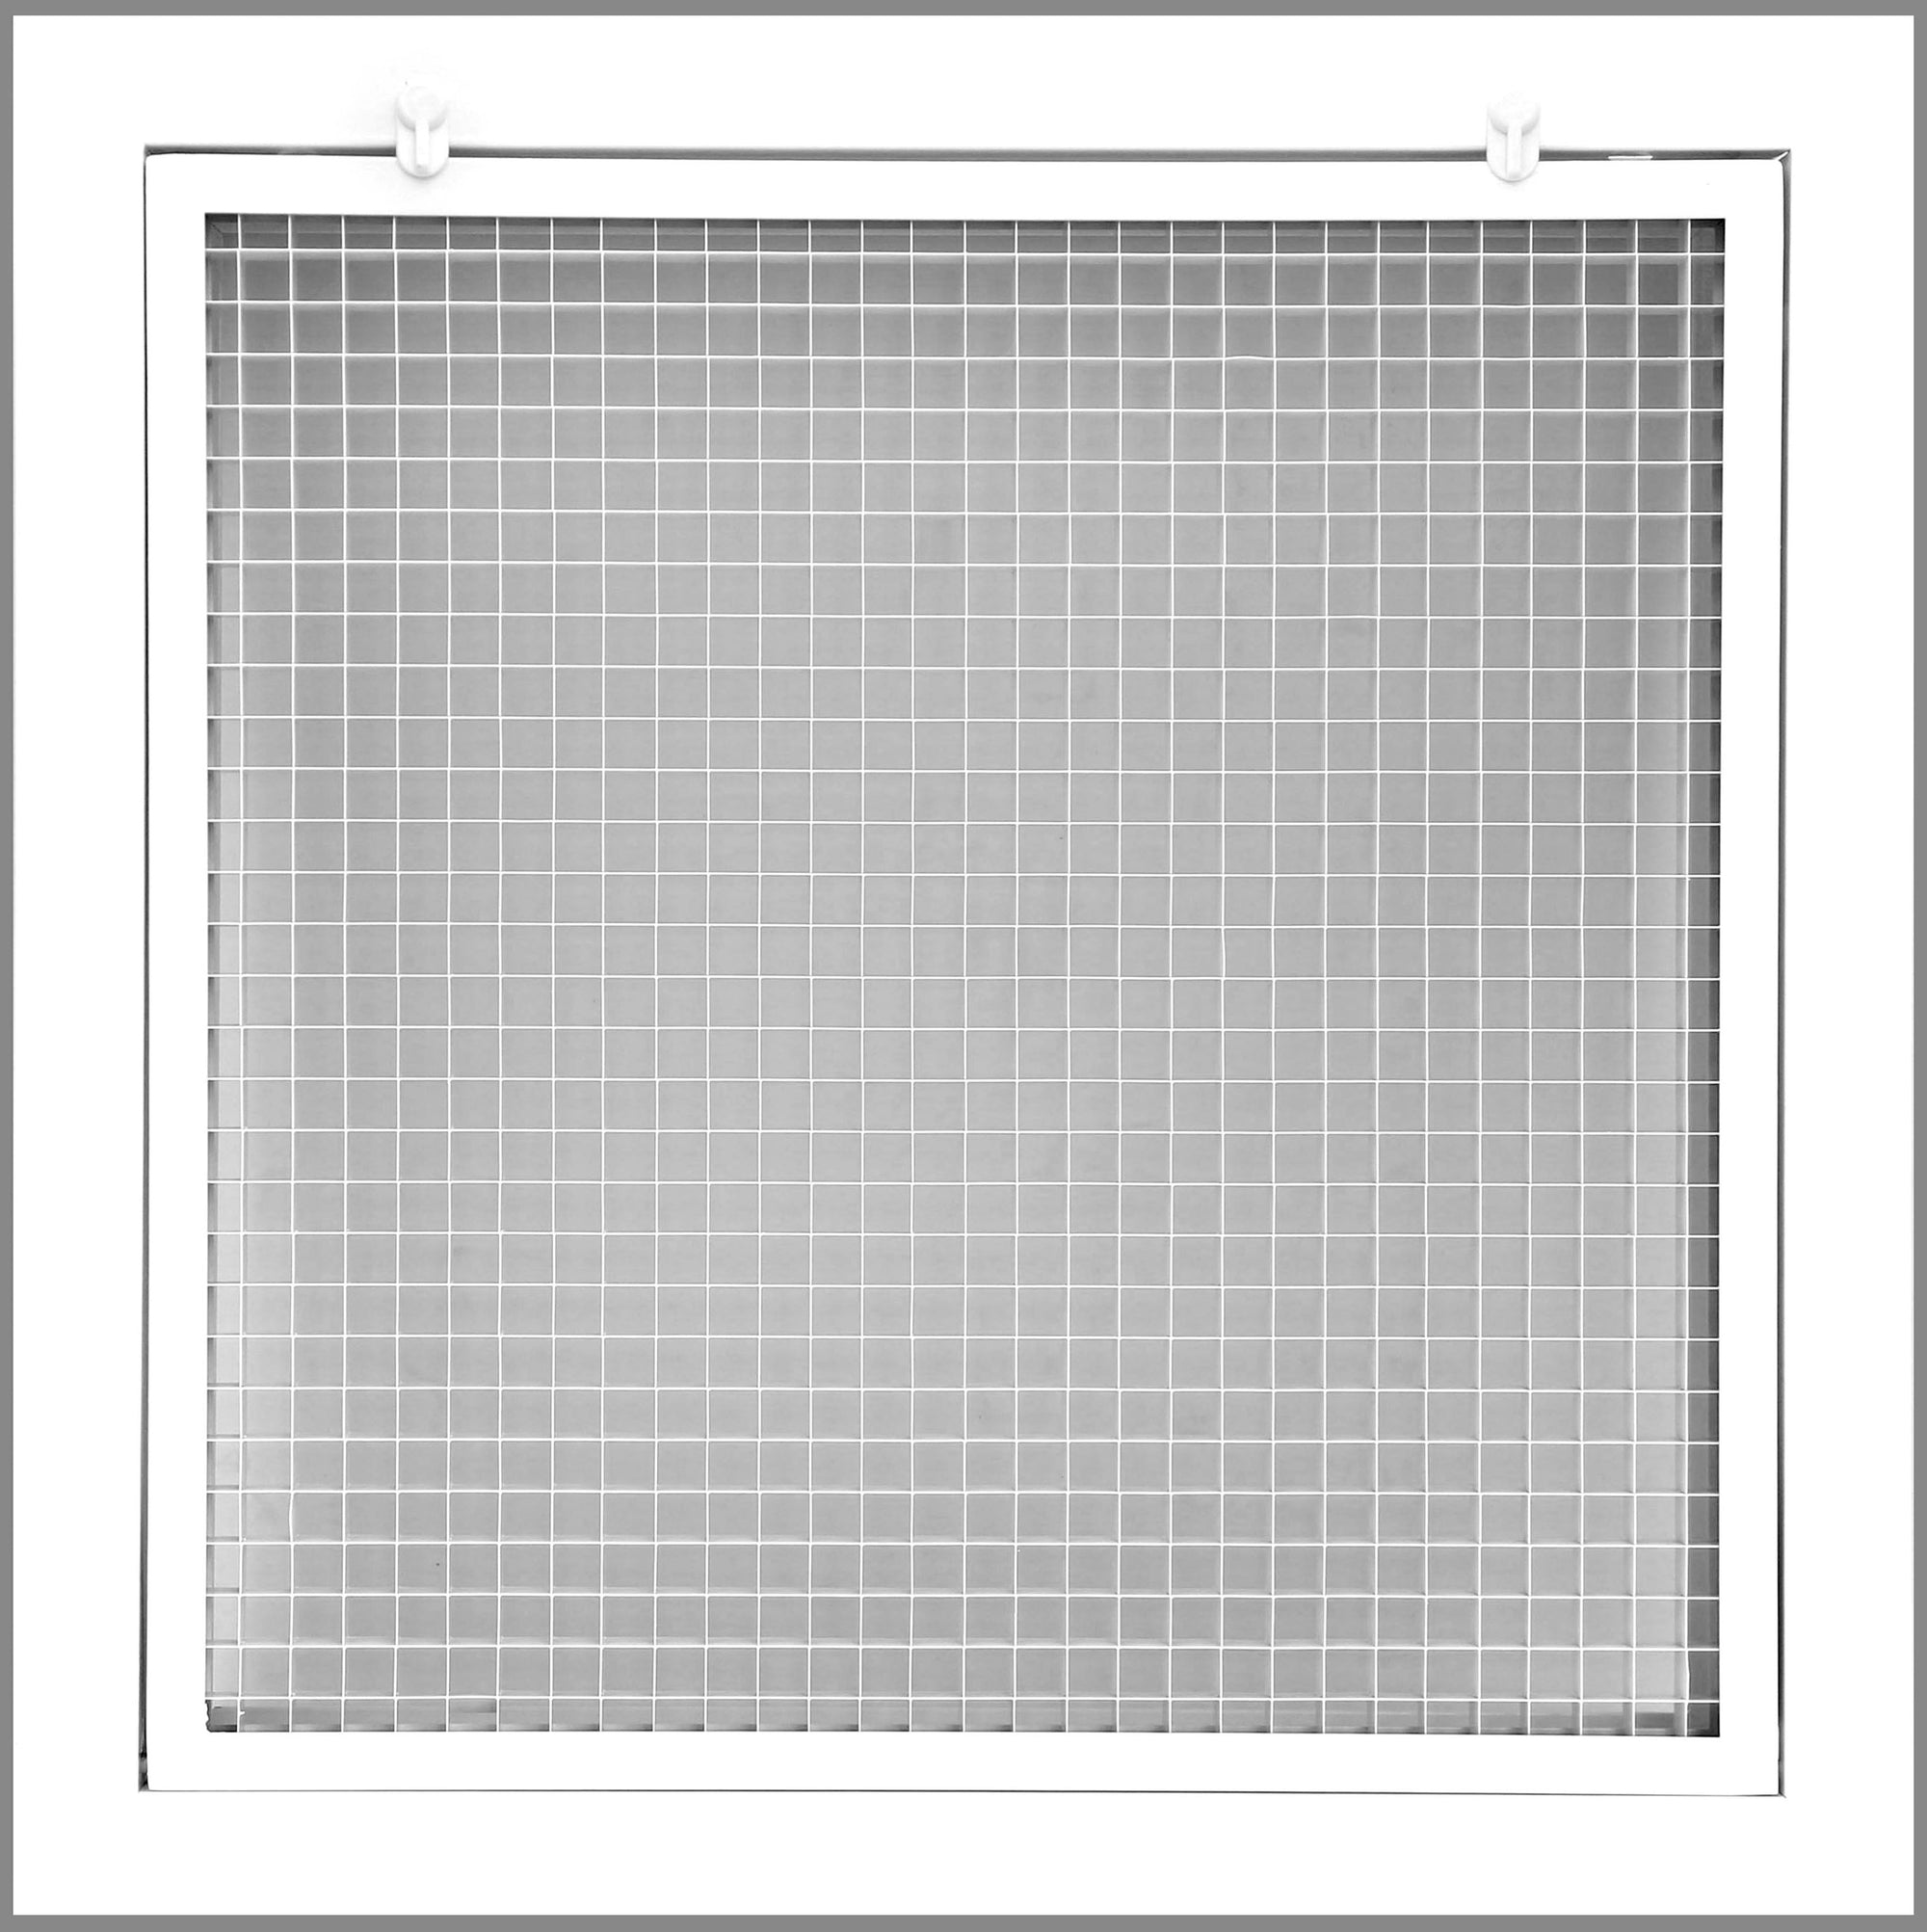 26" x 26" Cube Core Eggcrate Return Air Filter Grille for 1" Filter